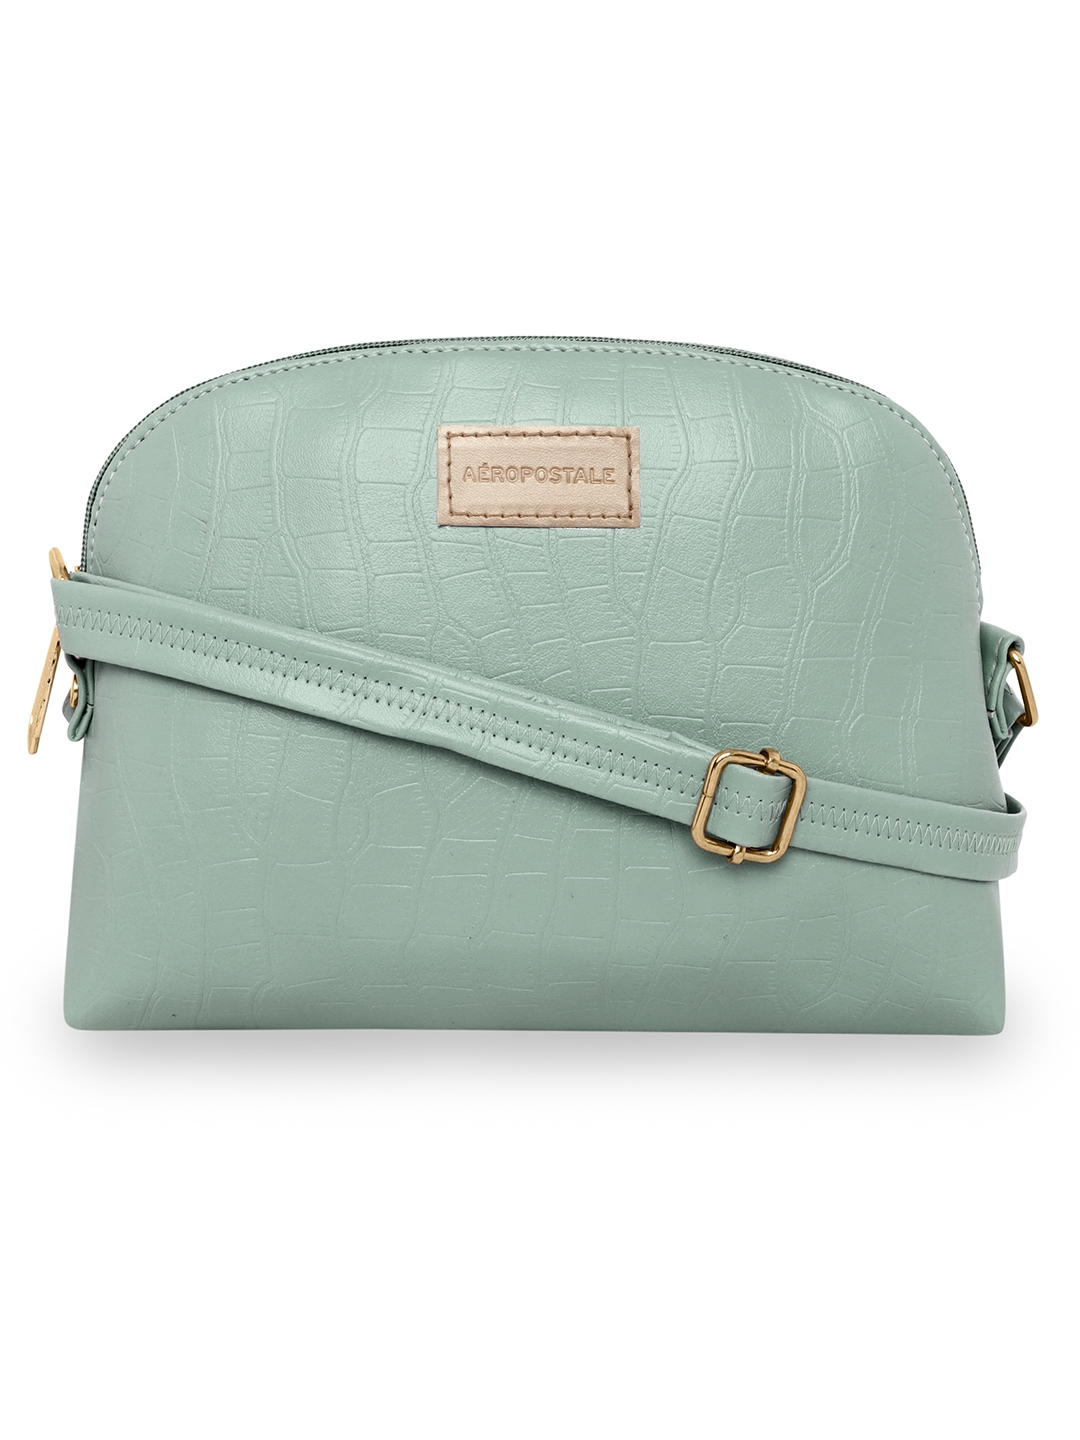 Aeropostale | Aeropostale Textured Kylie PU Sling Bag with non-detachable strap (Green) 0